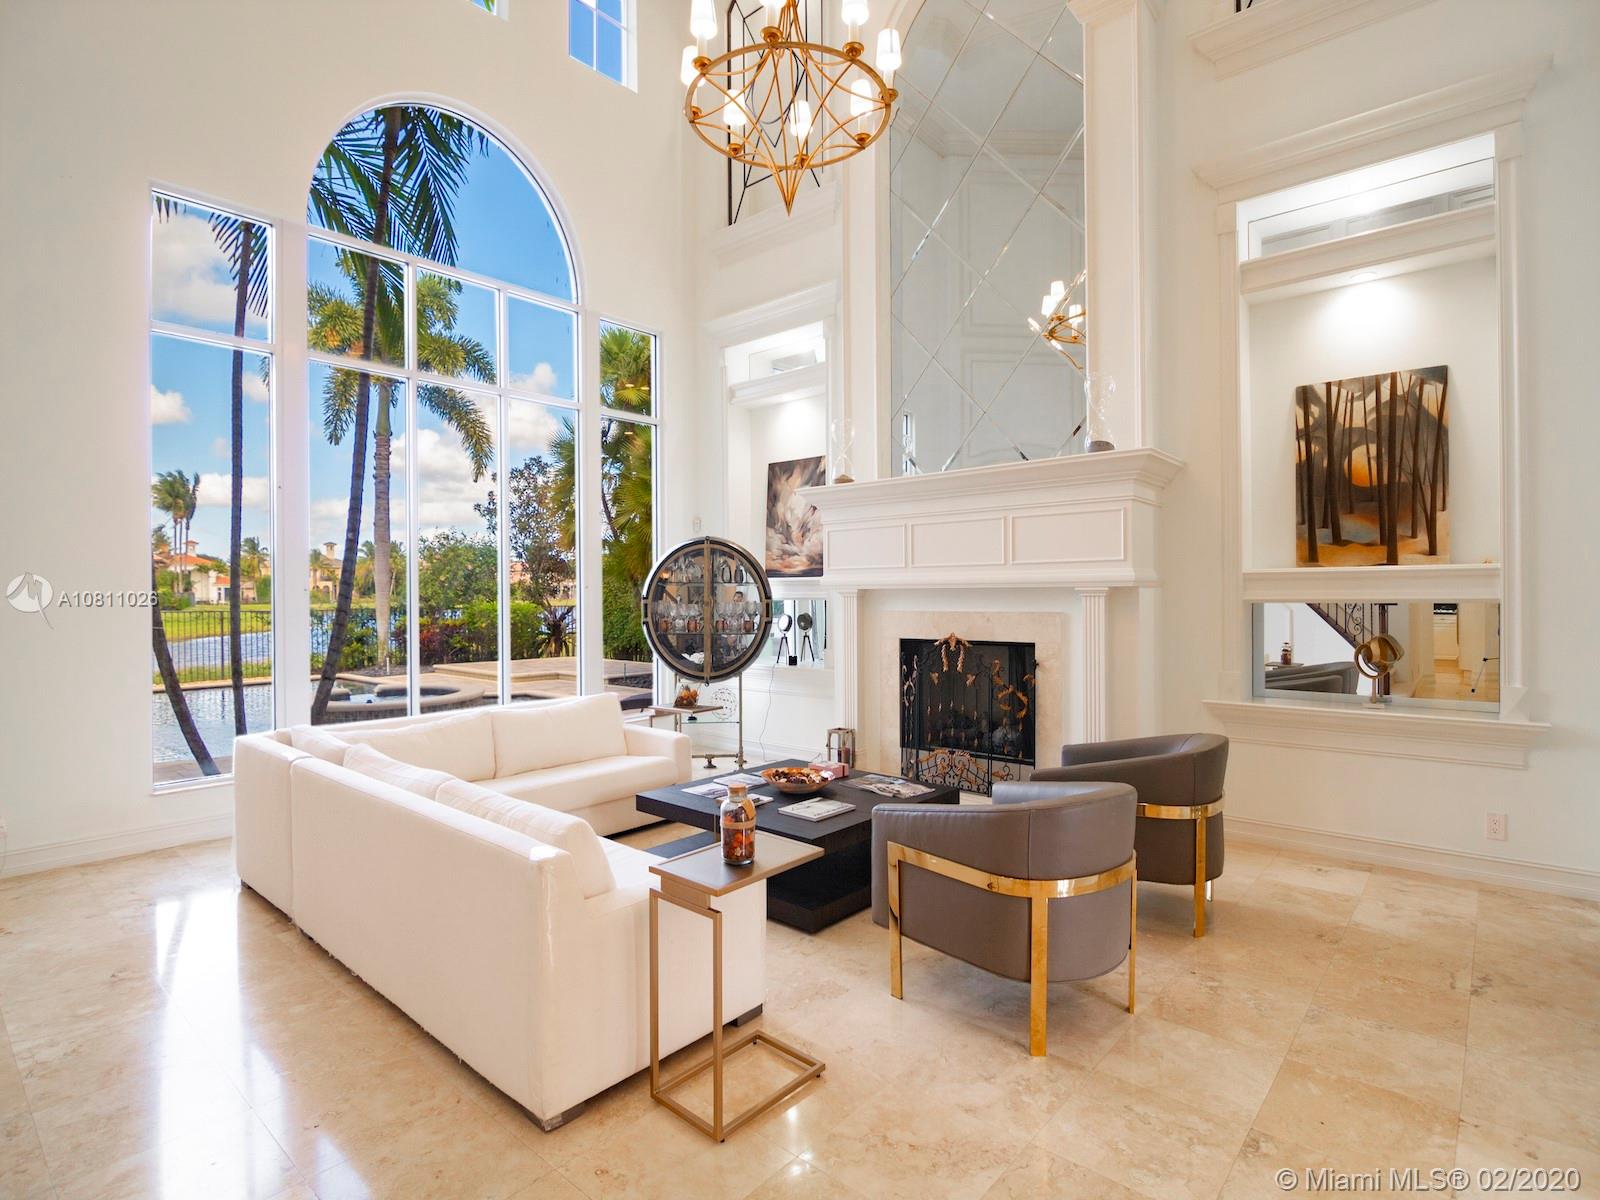 a living room with furniture a fireplace and a chandelier